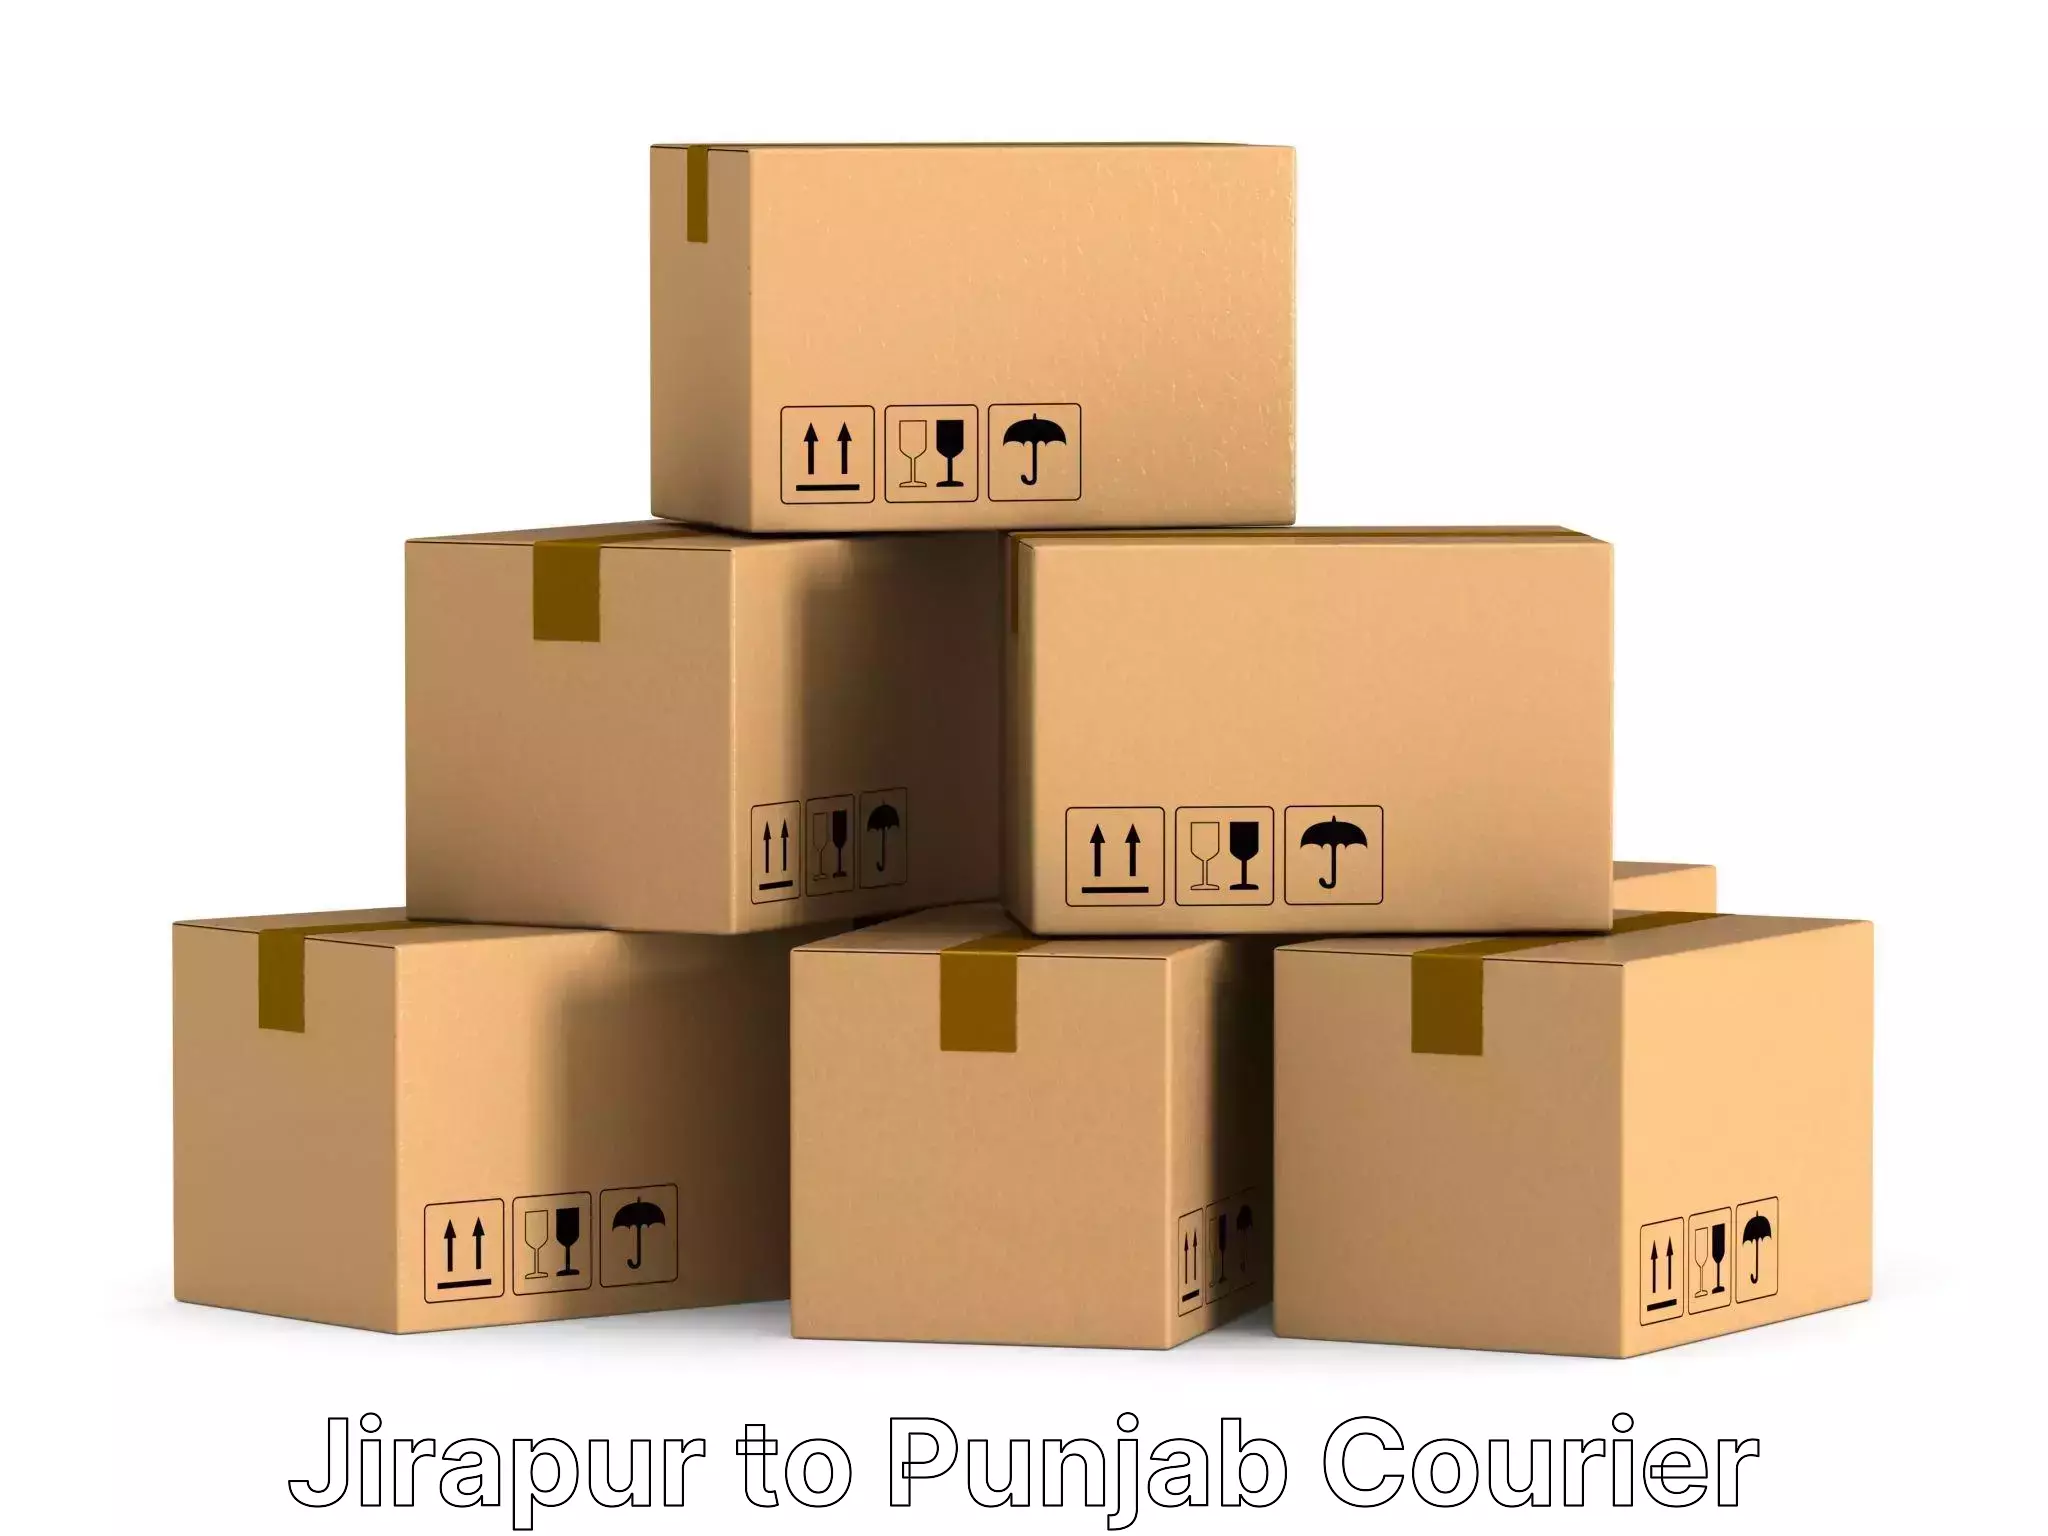 Household goods movers Jirapur to Pathankot